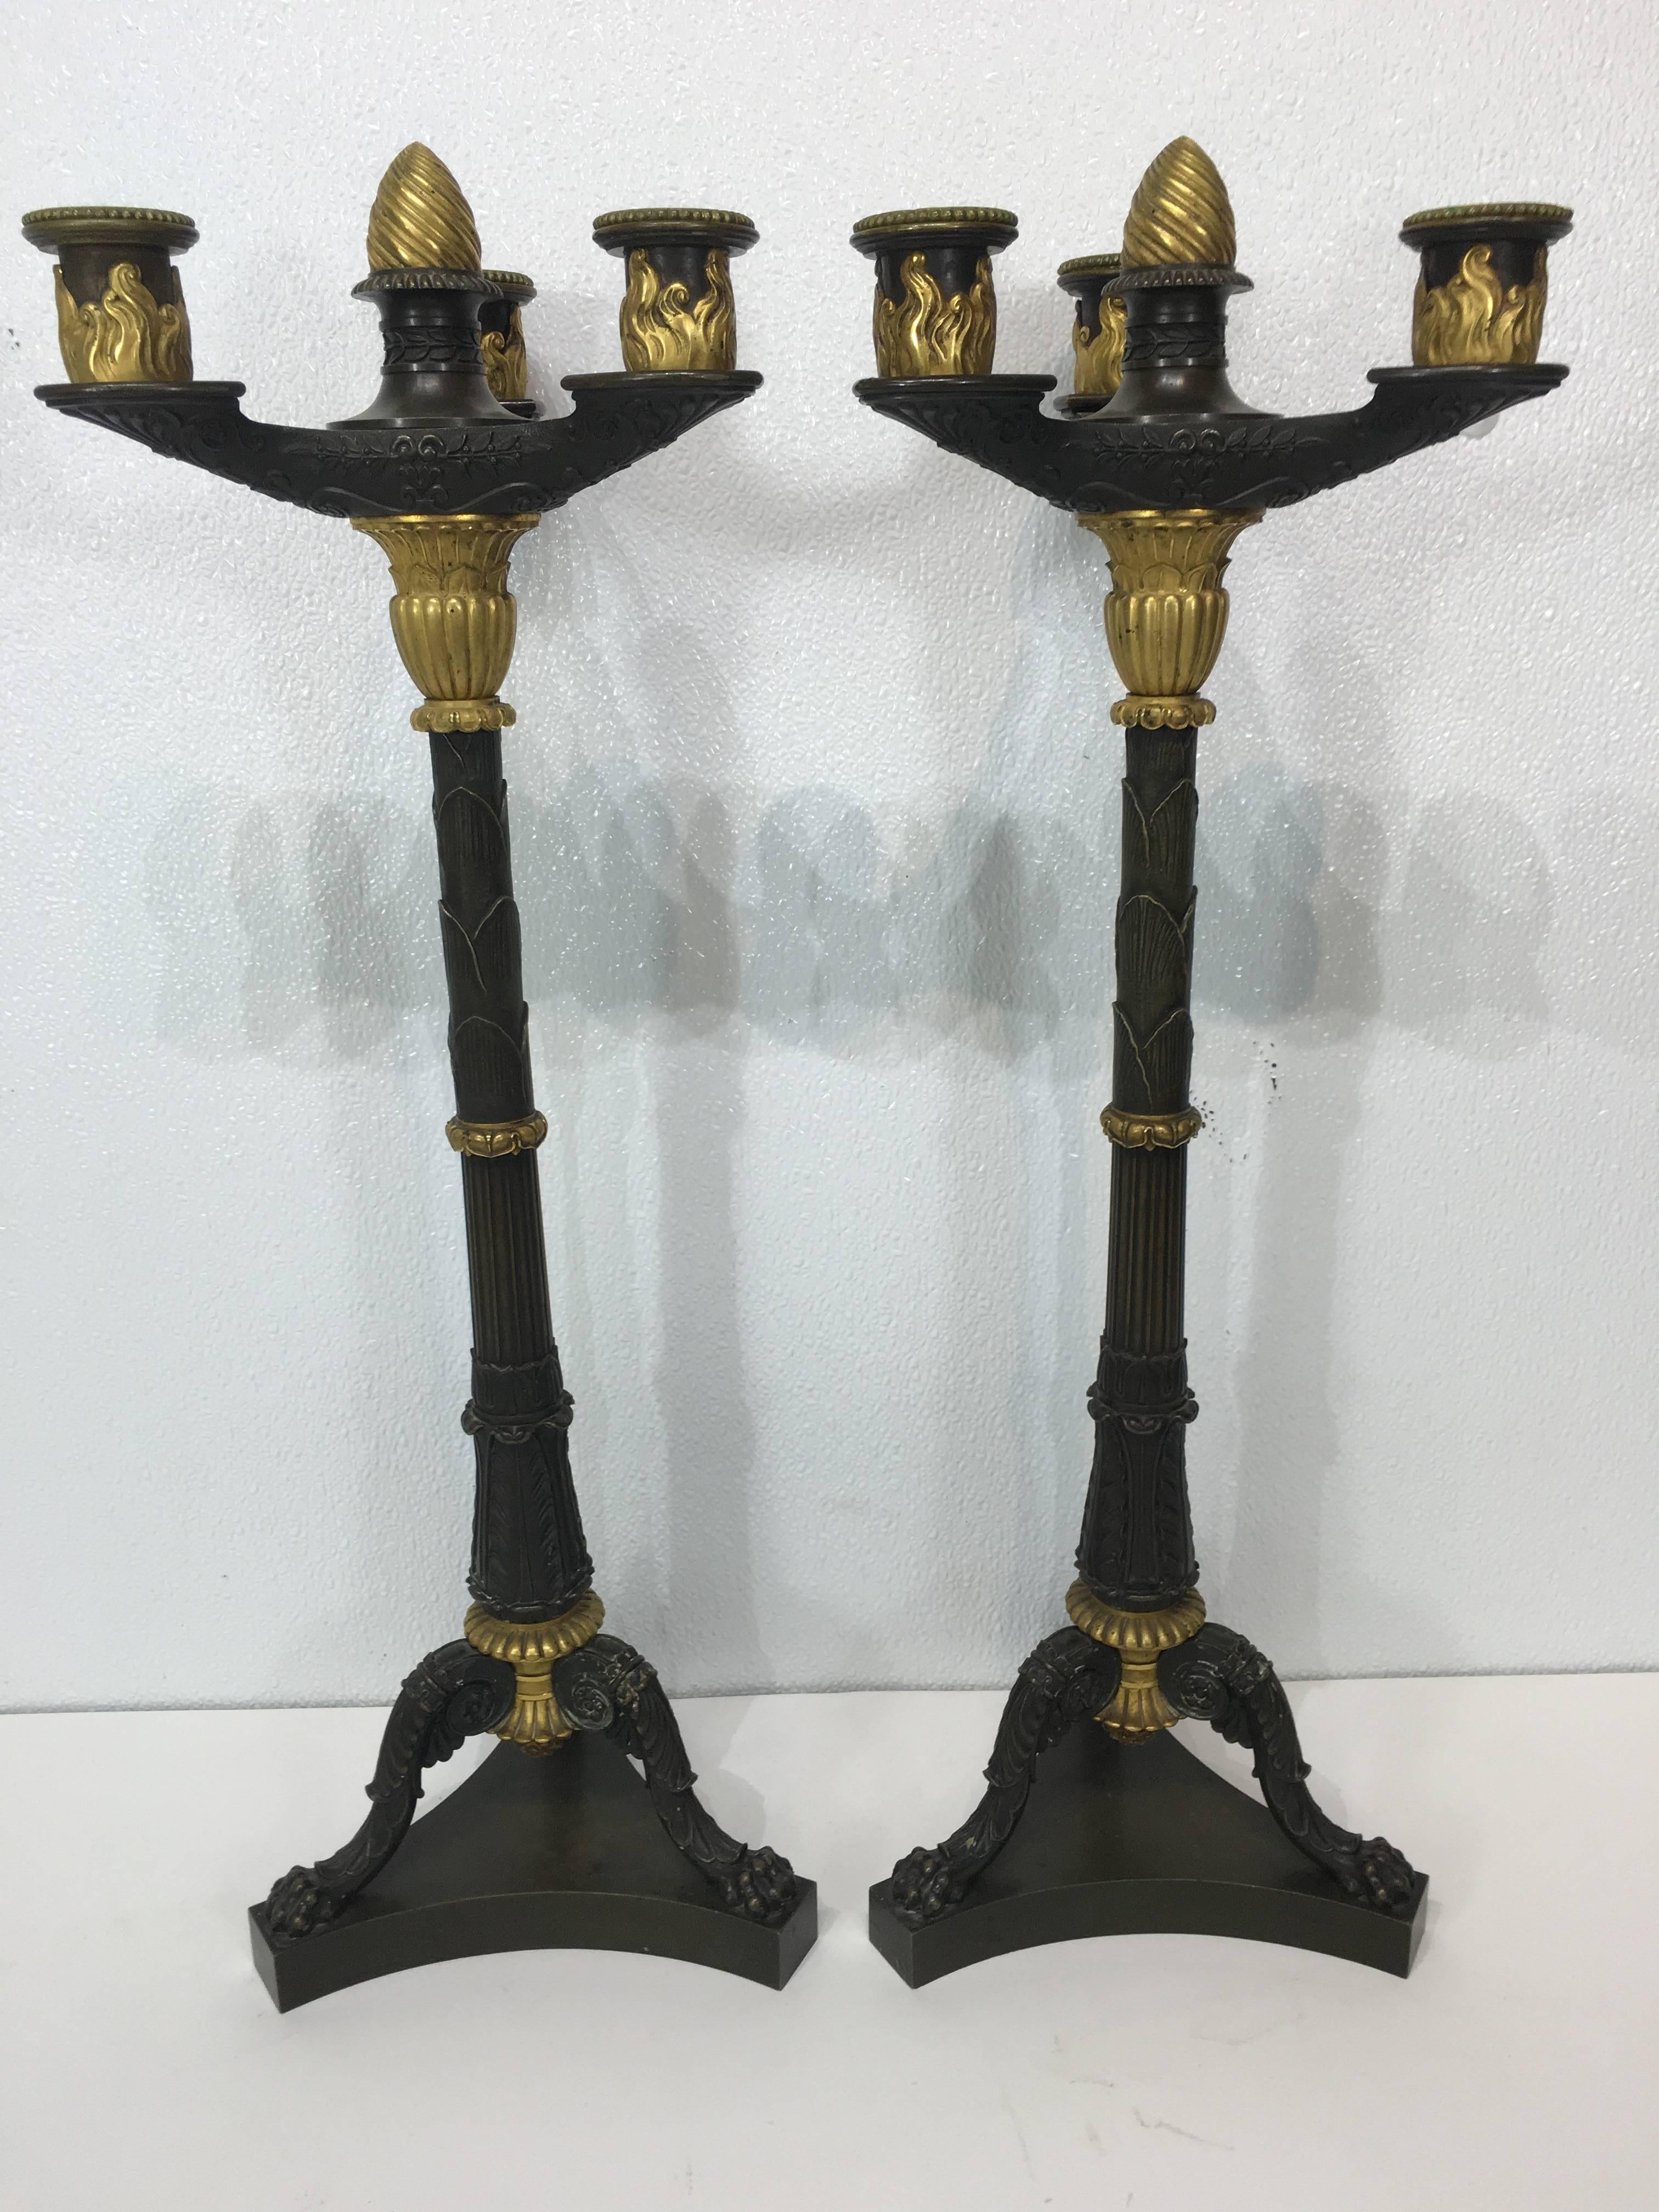 Pair of French Empire bronze candelabra, sleek and sophisticated in design, each one fitted with three lights, fire gilt details, raised on an organic column with paw foot pedestal base. Unsigned.
         